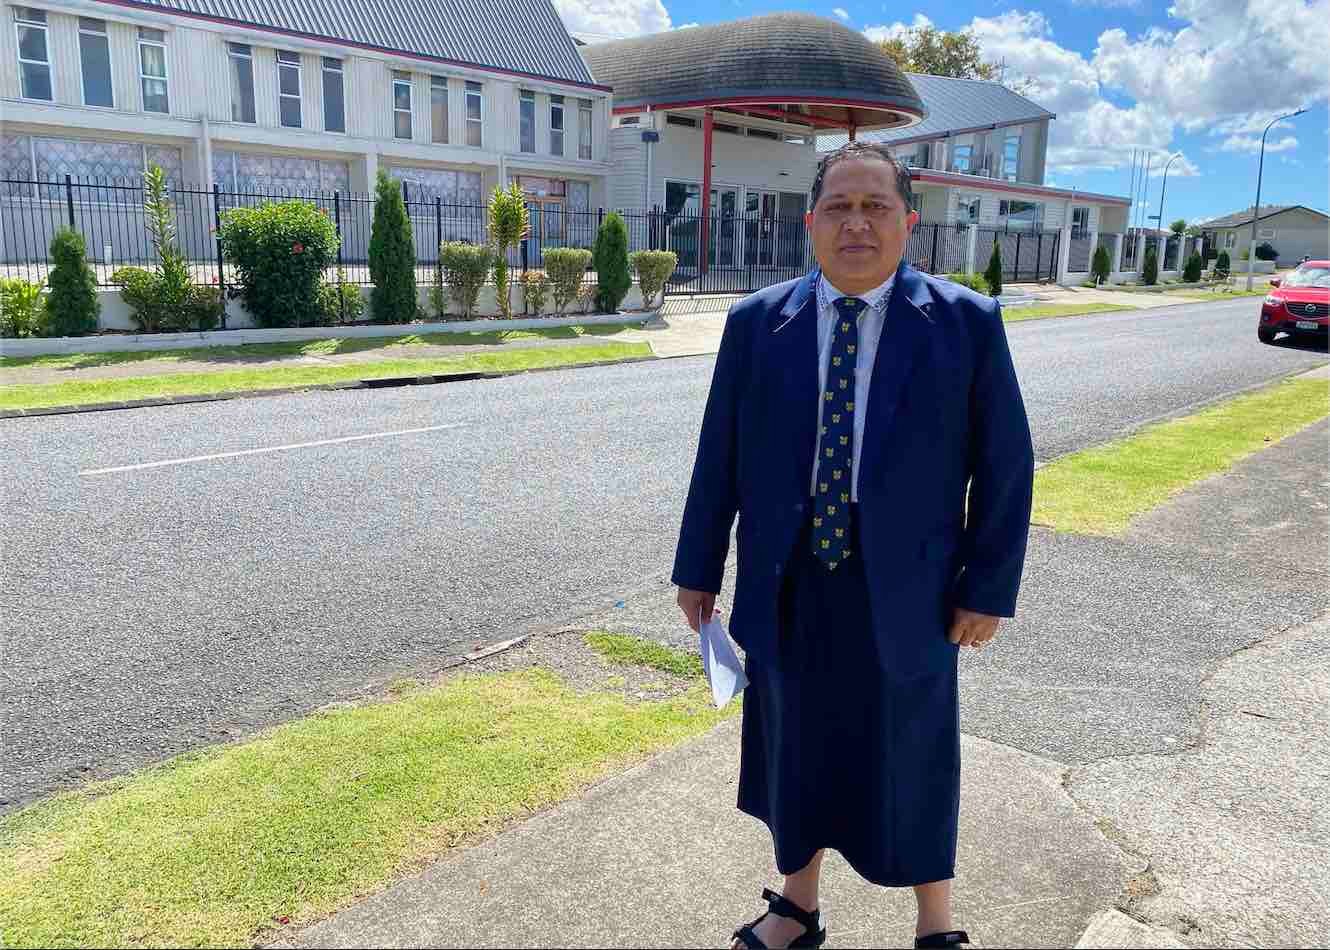 Reverend Victor Pouesi opened up the E.F.K.S Māngere East Puaseisei church facilities to parishioners for self-isolation.